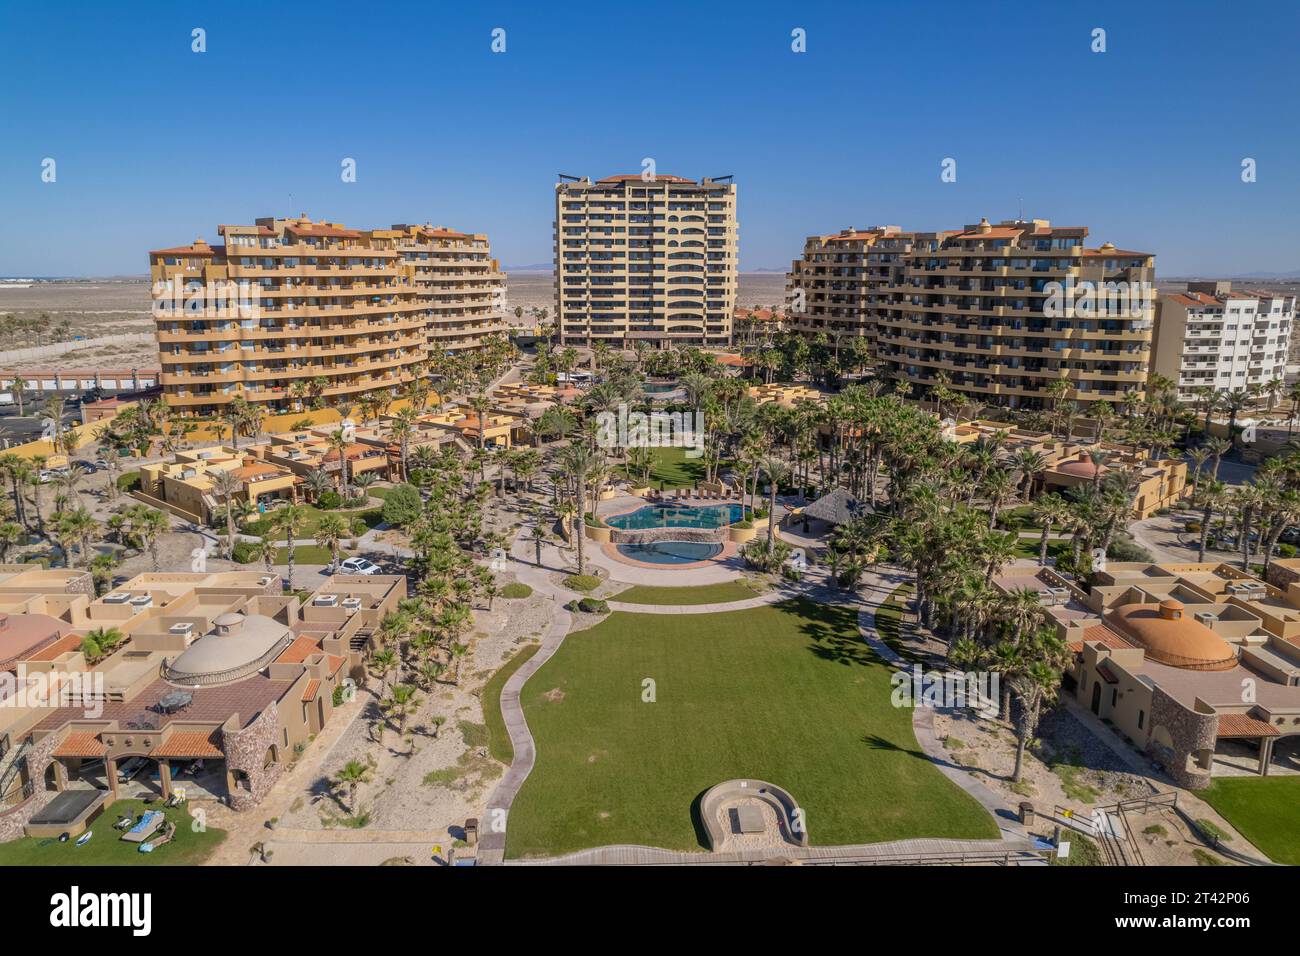 An aerial view of the hotels on the beach on a sunny day in Puerto Penasco, Sonora, Mexico. Stock Photo